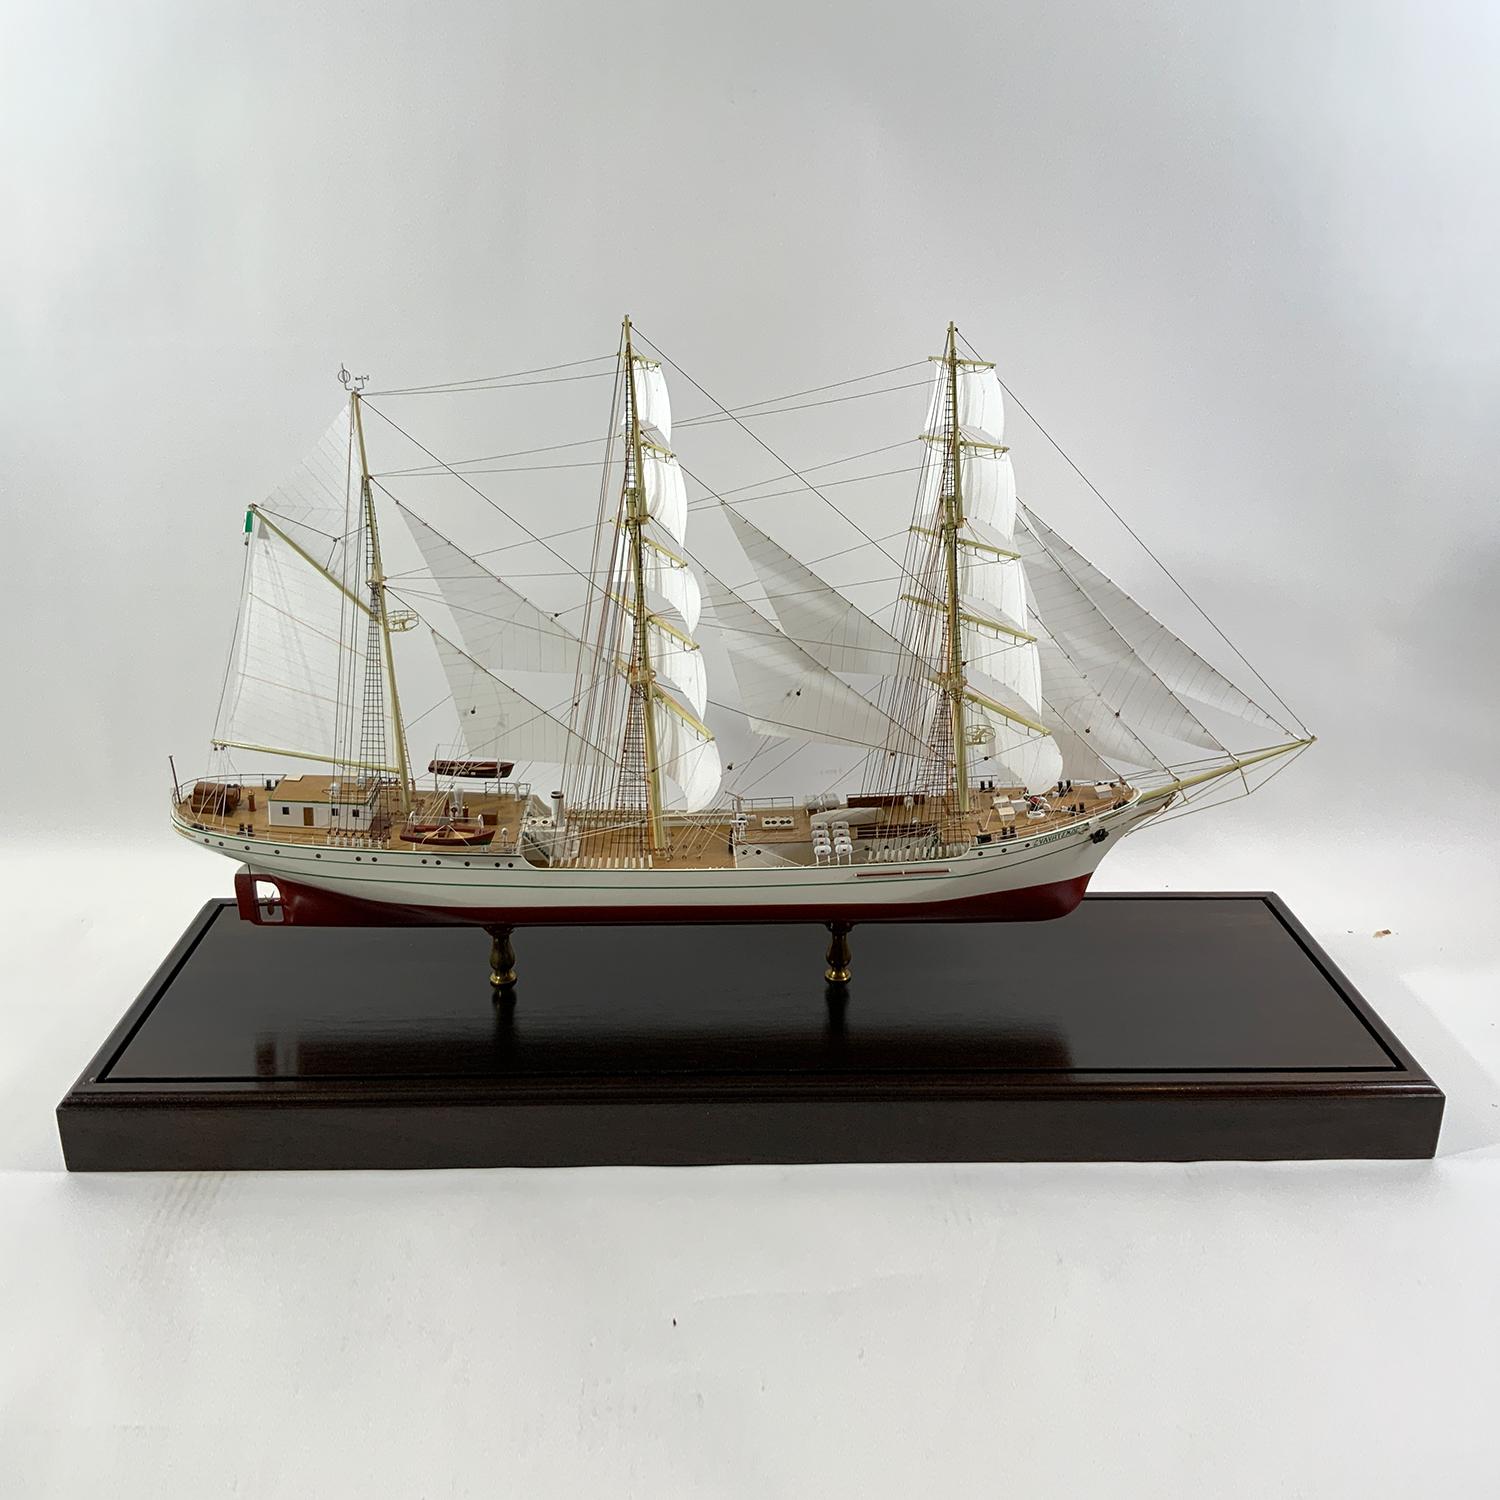 Scale model of the Mexican tall ship Cuauhtemoc. The model comes from the ship model workshop of Zygmunt Chorén, naval architect from Poland. The model is crsiply detailed with standing and running rigging and a full suit of sails. Fitted to a